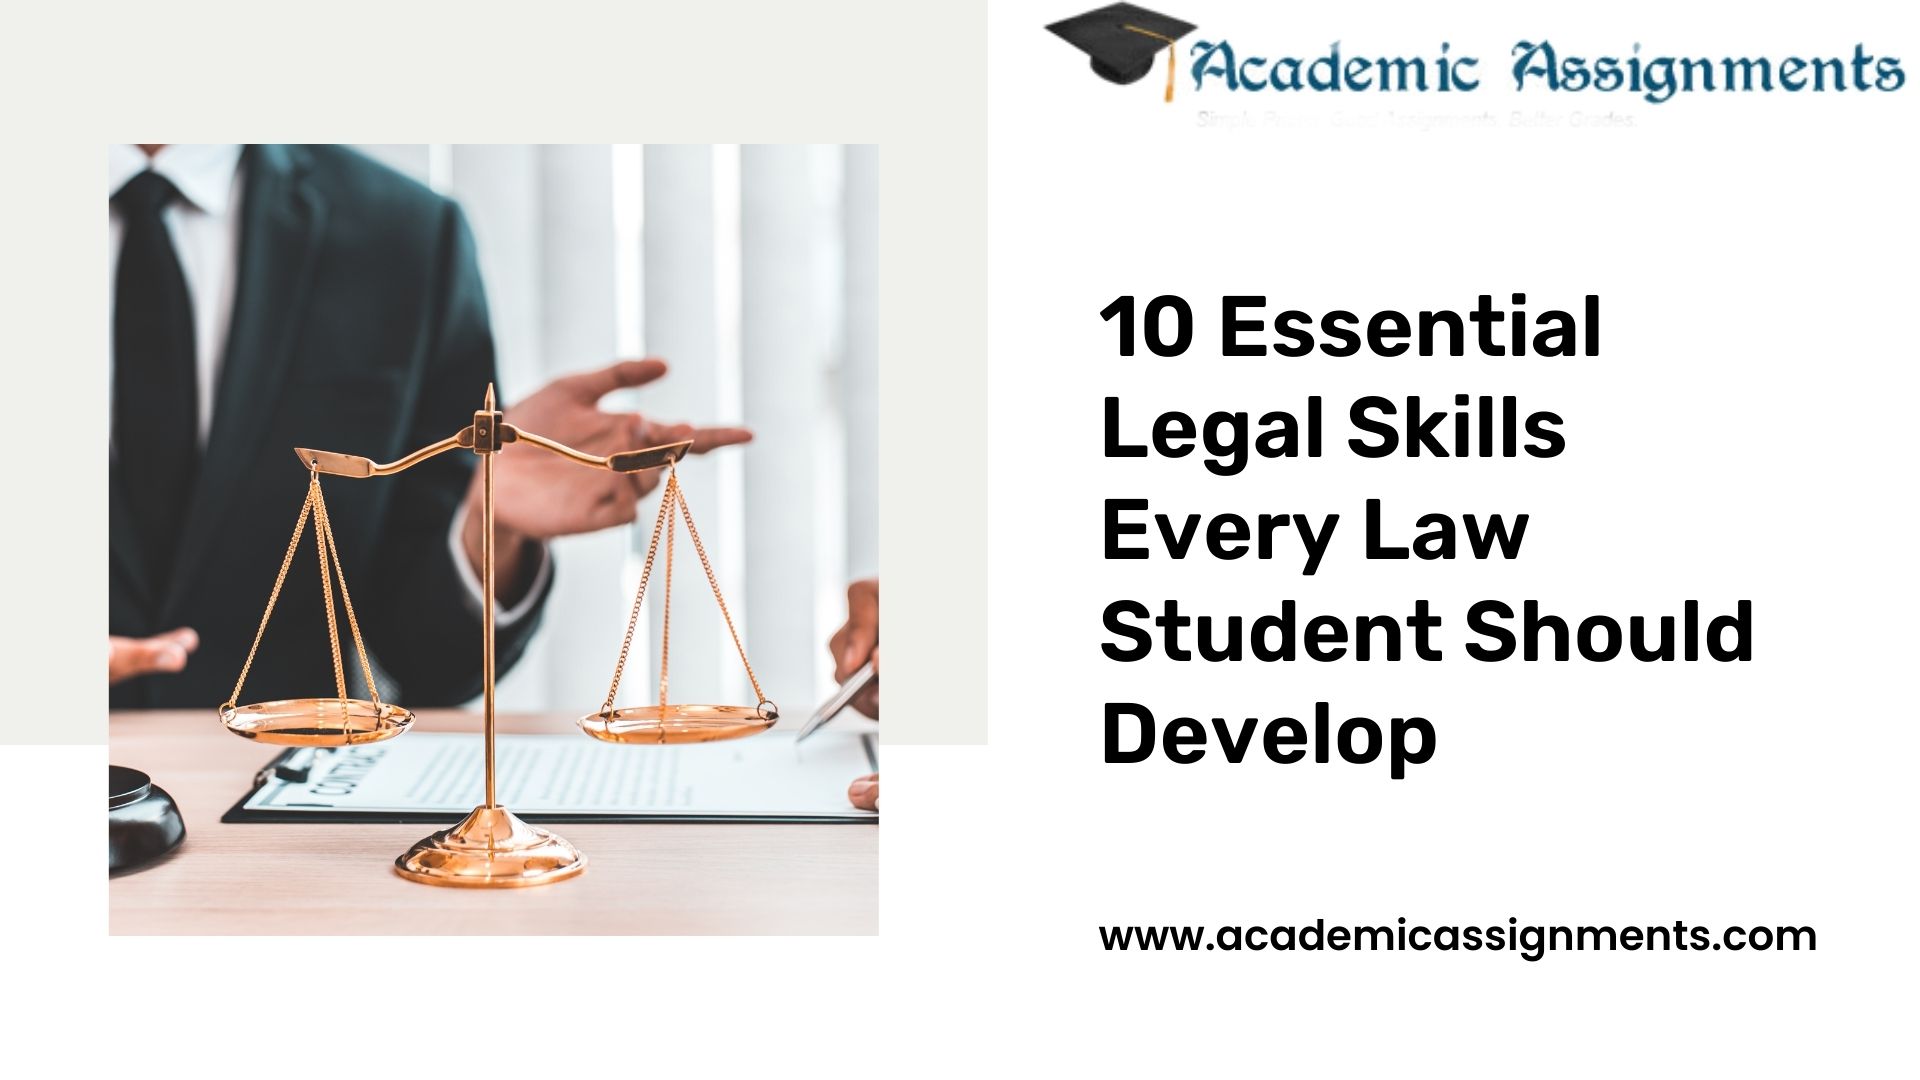 10 Essential Legal Skills Every Law Student Should Develop